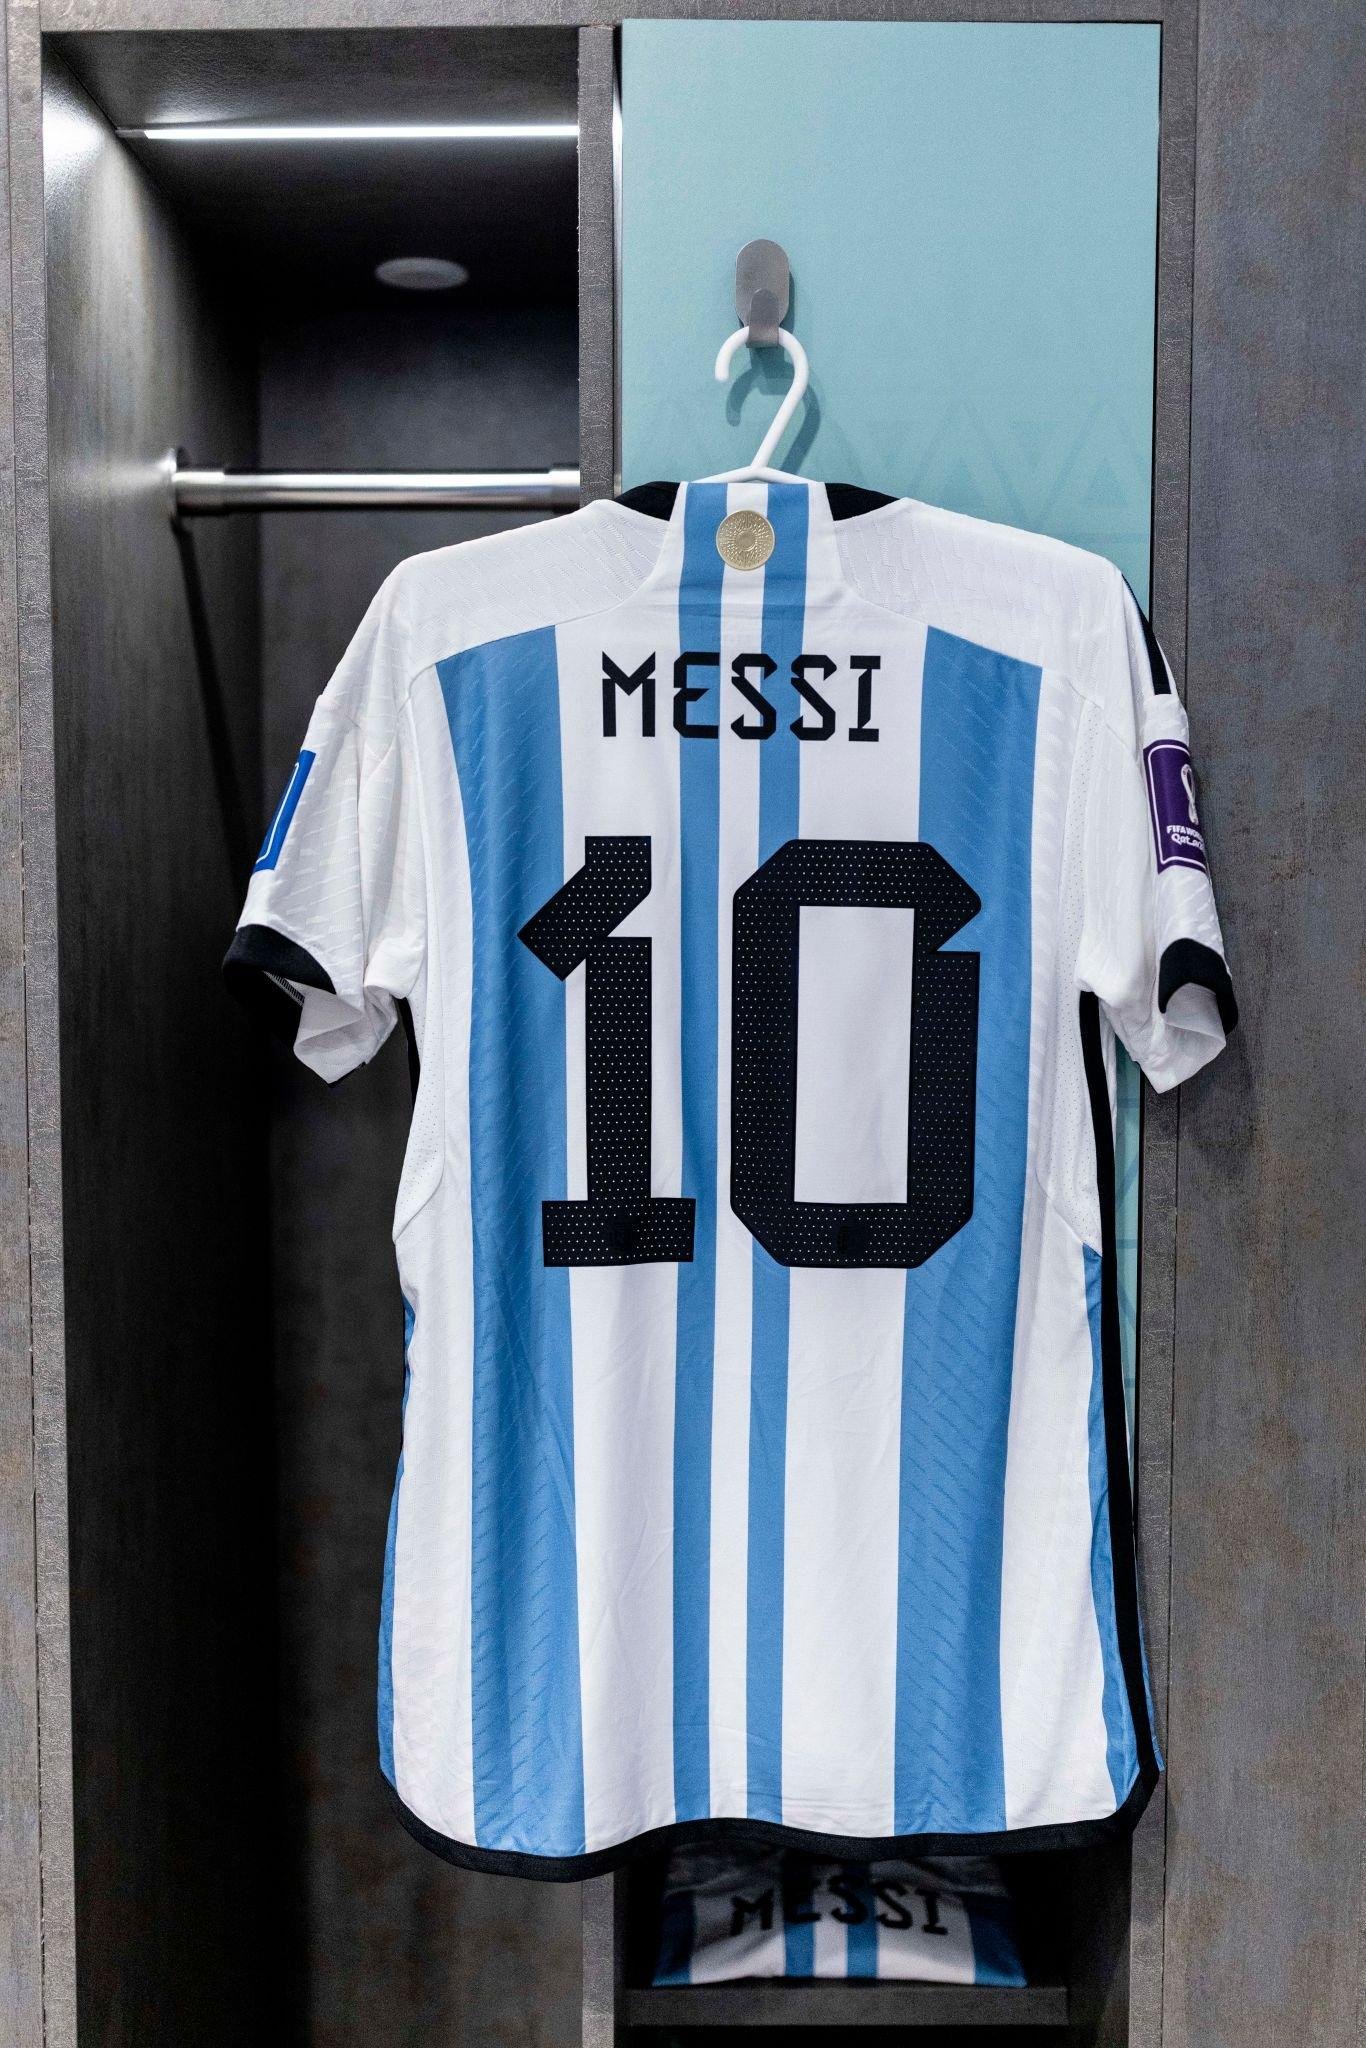 Argentina World Cup winners shirt: Where can I buy the updated jersey?